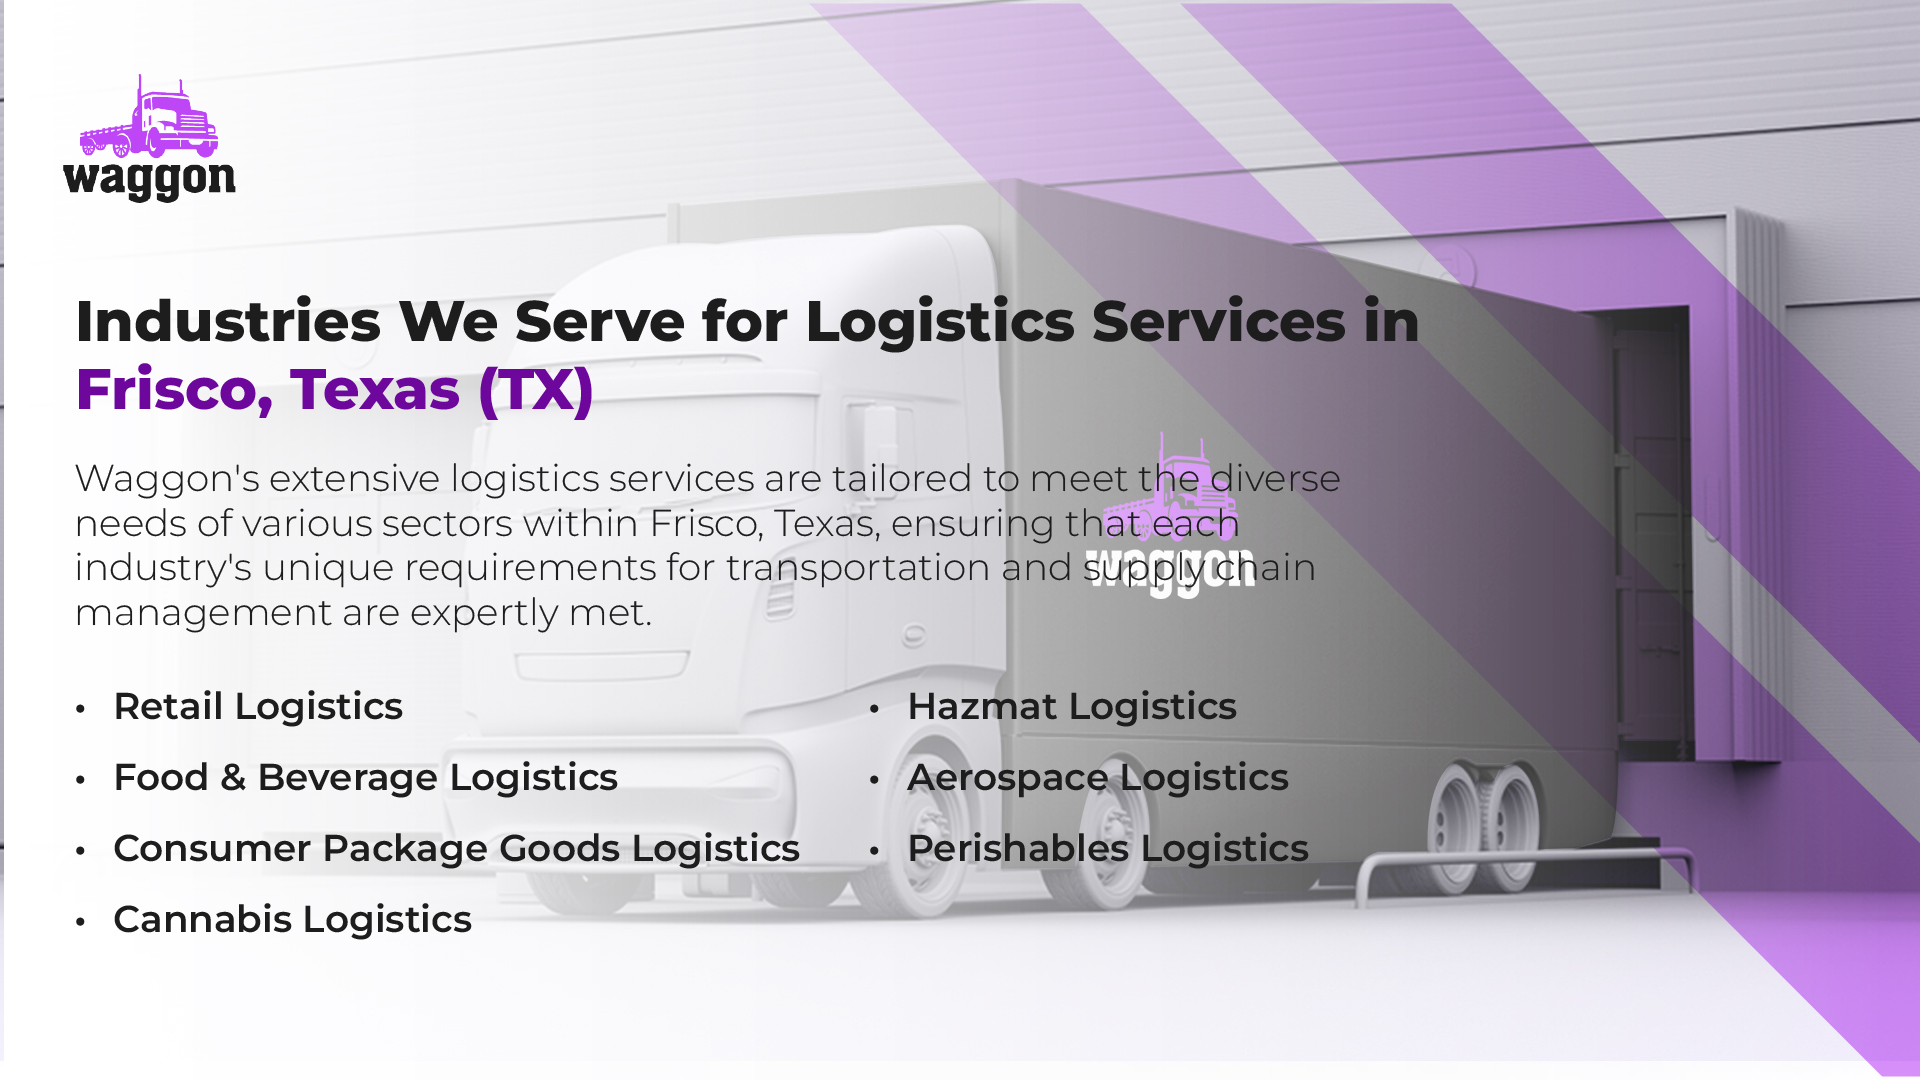 Industries We Serve for Logistics Services in Frisco, Texas (TX)